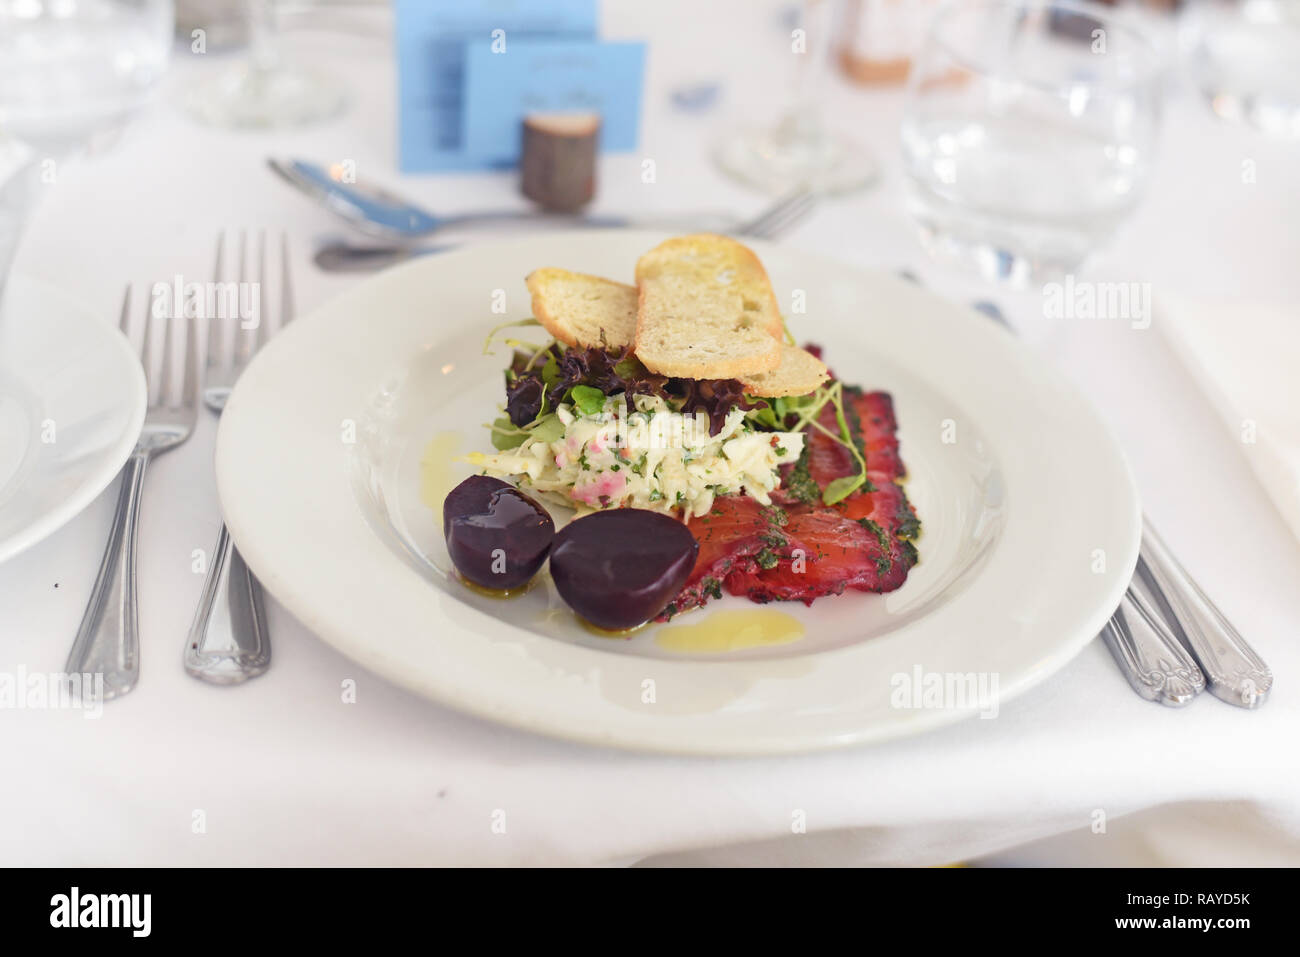 Fine dining smoked salmon starter with beetroot and salad well presented a la carte meal in a table setting Stock Photo